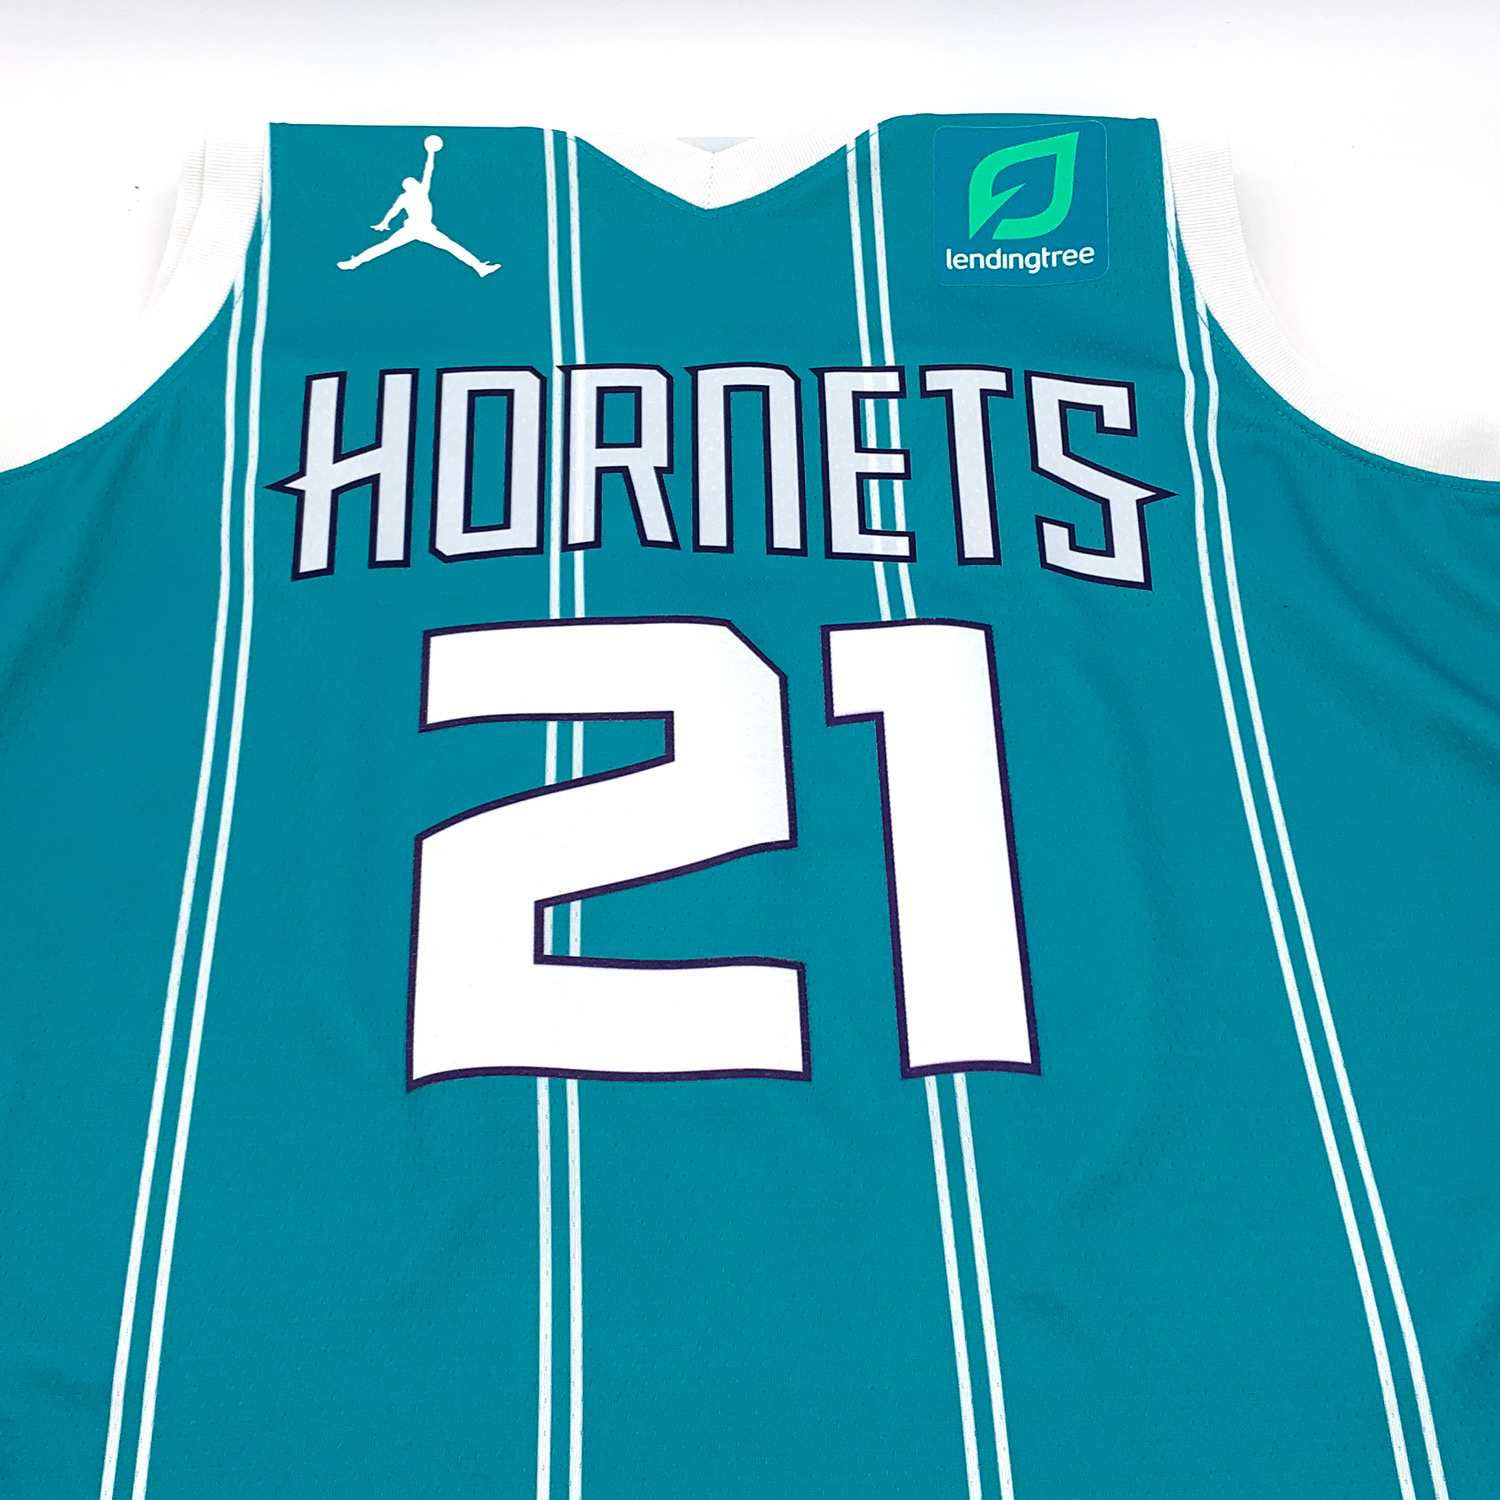 Jersey you wish they'd bring back? : r/CharlotteHornets